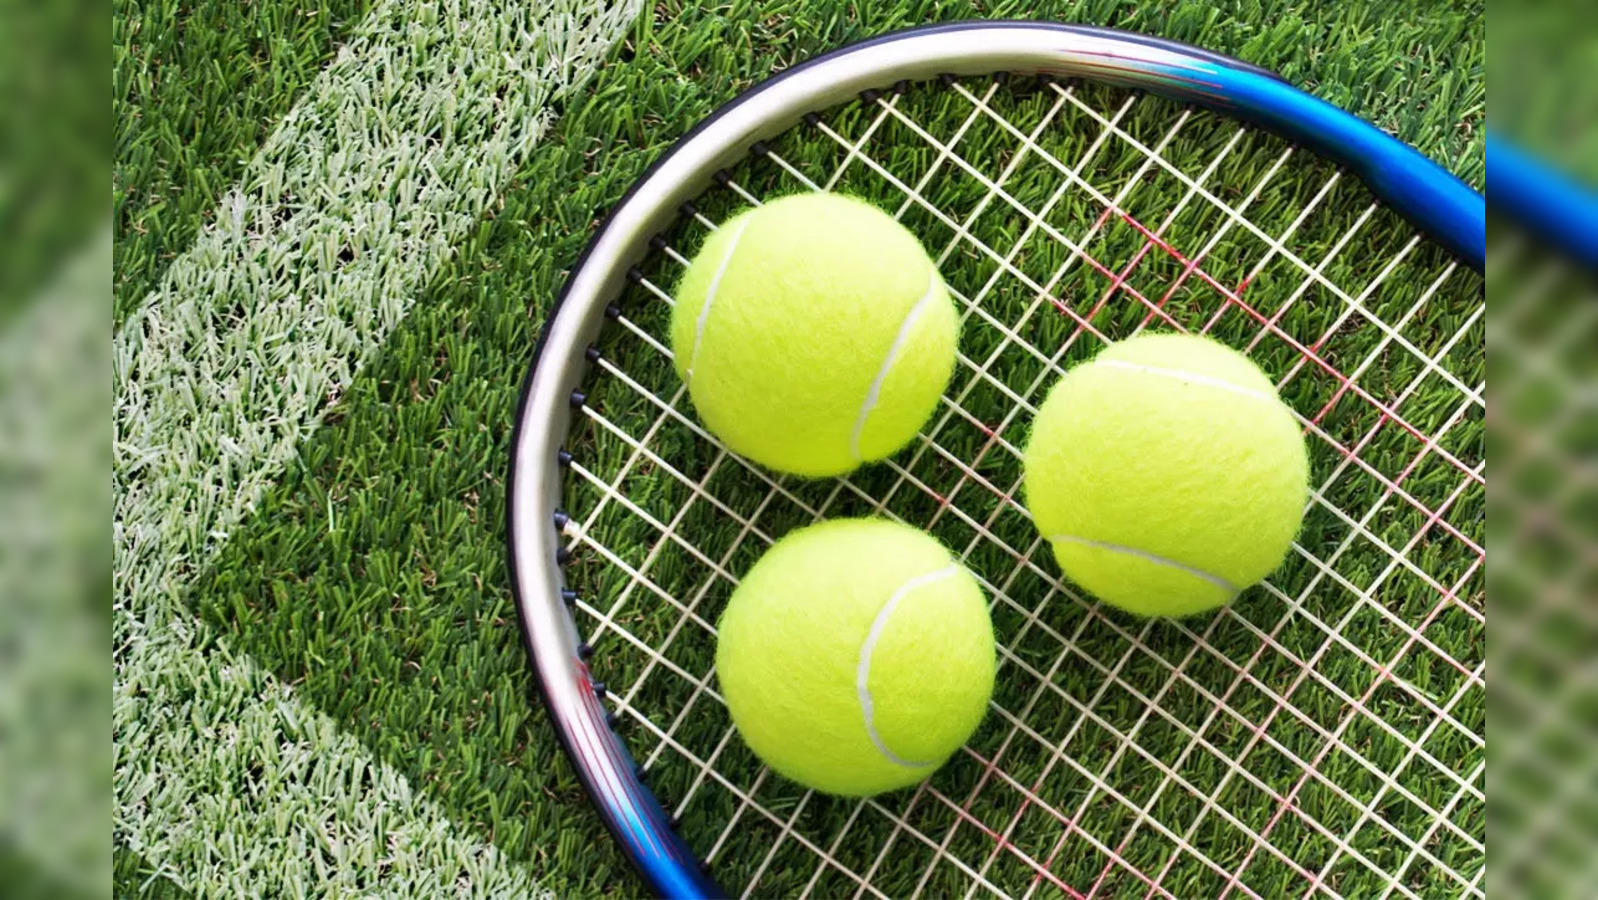 Step One - Balls…. 🎾🎾 We all have them, but what do we